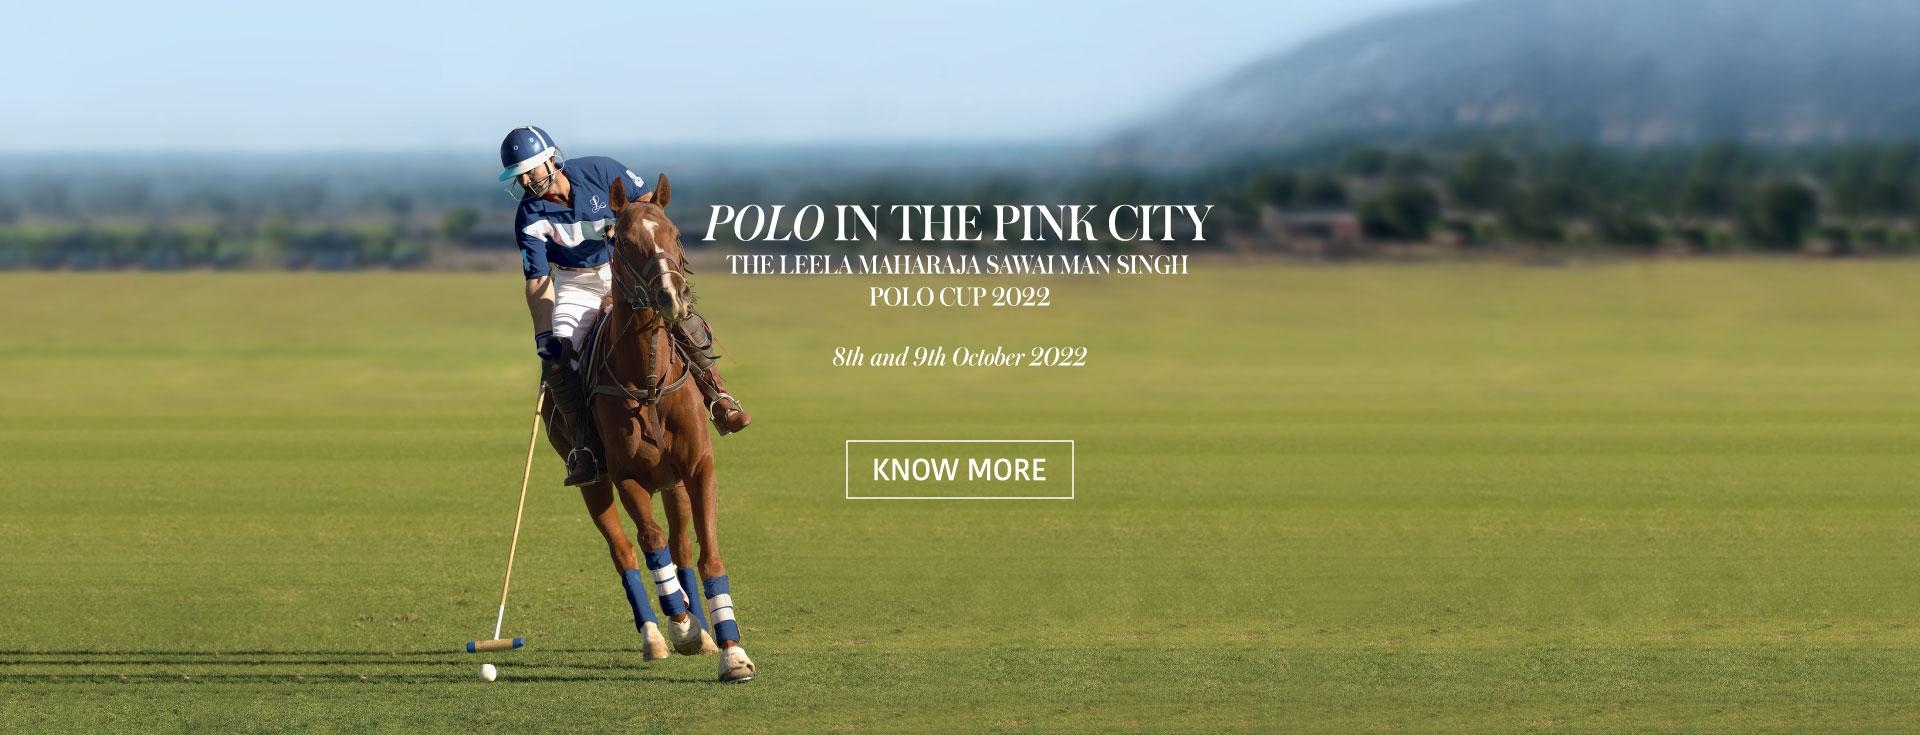 Polo in pink city - Jaipur